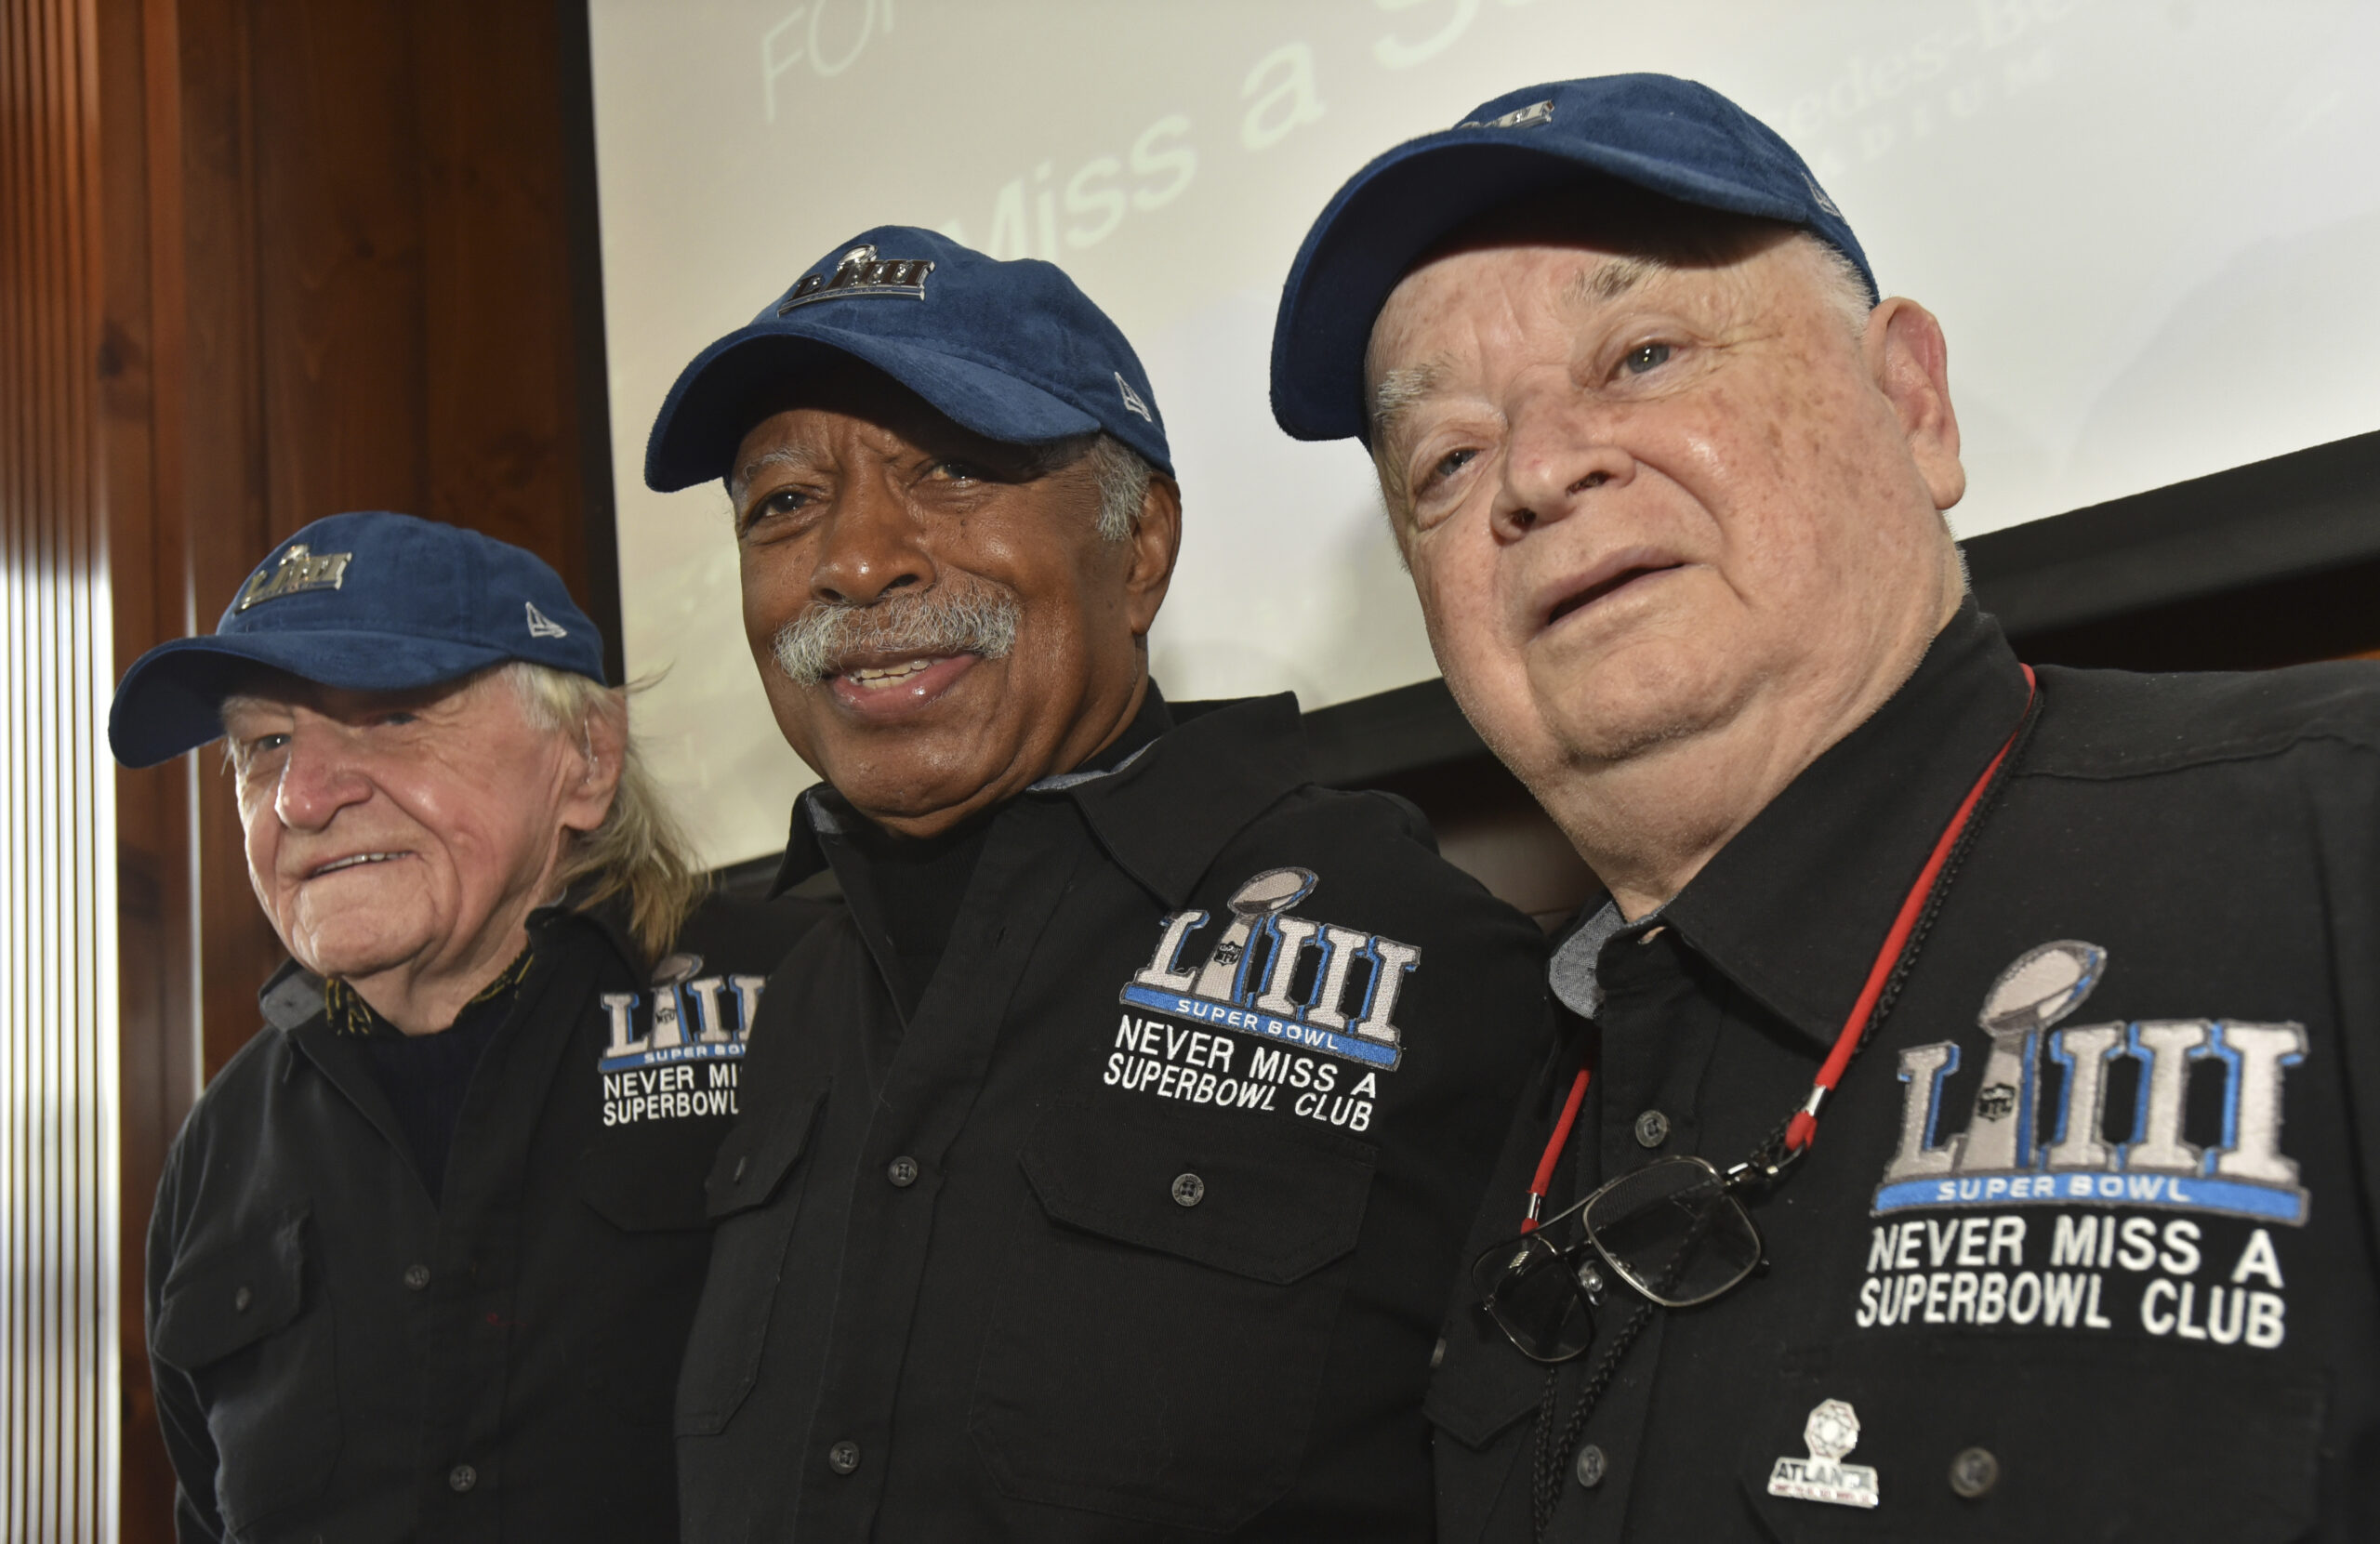 FILE — Members of the Never Miss a Super Bowl Club, from the left, Tom Henschel, Gregory Eaton, and Don Crisman pose for a group photograph during a welcome luncheon, in Atlanta, Friday, Feb. 1, 2019. The three men have attended every game since the first AFL-NFL World Championship held 55 years ago. They're meeting at the Super Bowl once again for this year's game, but future meetings are in question. (Hyosub Shin/Atlanta Journal-Constitution via AP, File)